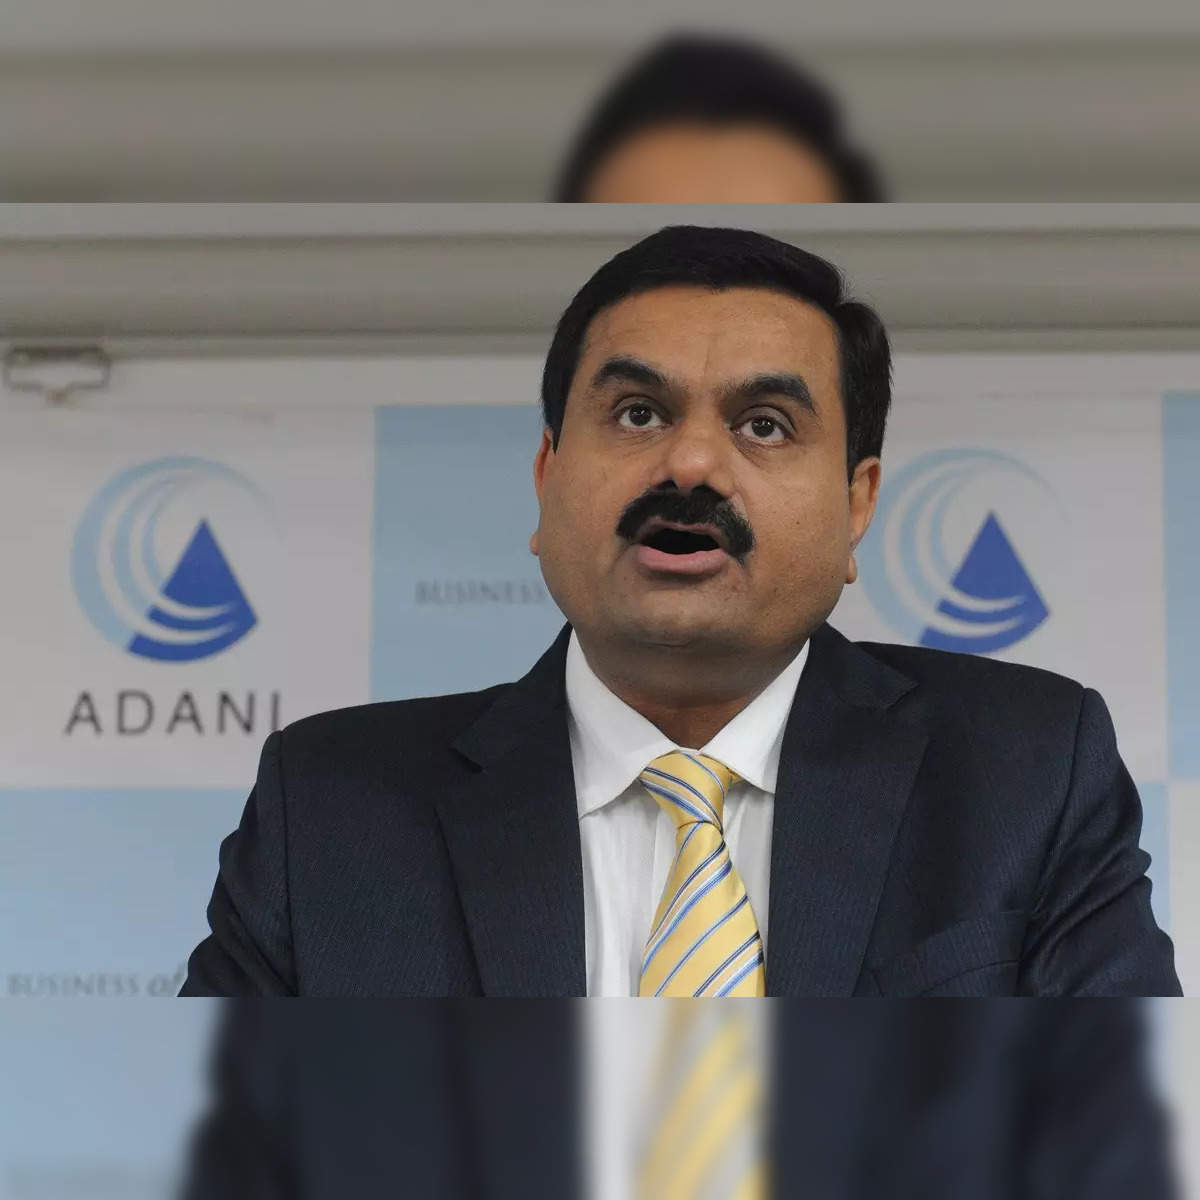 Adani Group faces US scrutiny over alleged stock manipulation